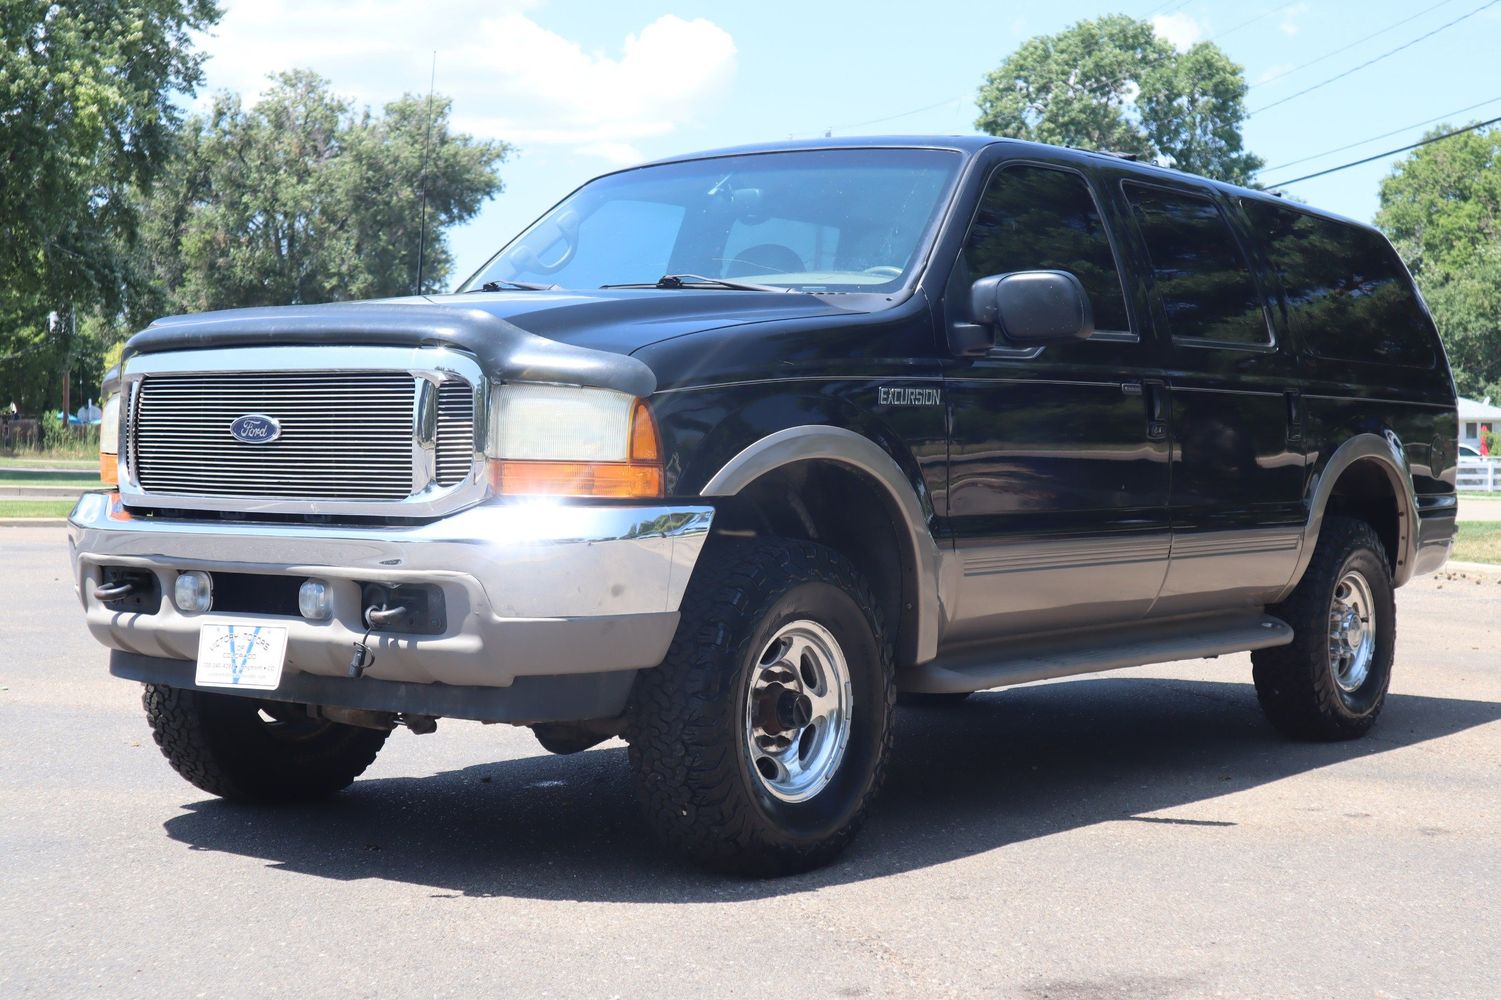 2001 ford excursion 5.4